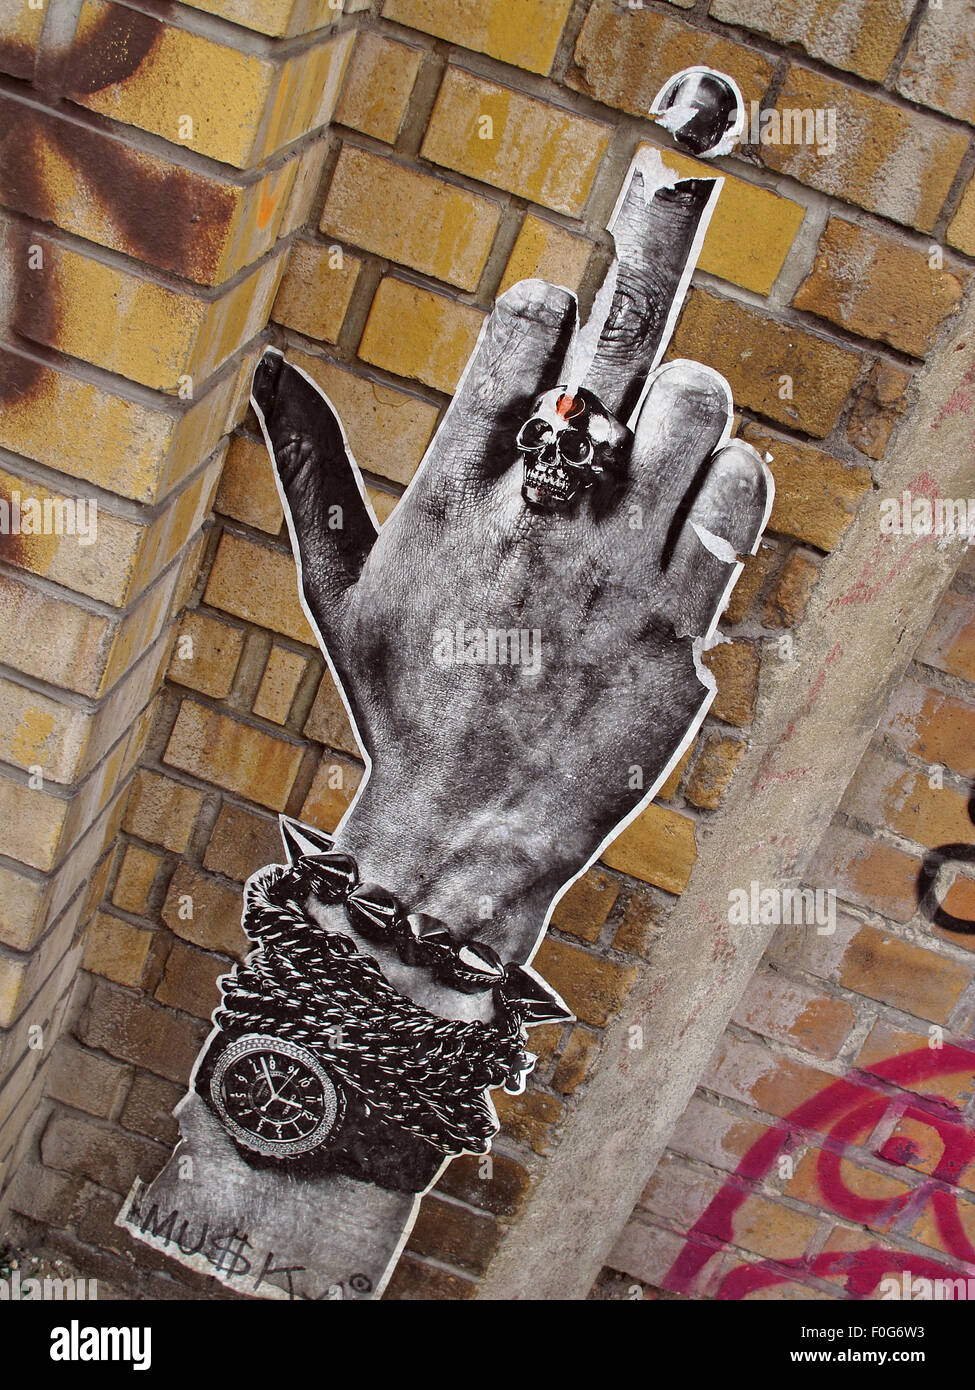 Berlin Mitte,Street art on walls,Germany,watch,arm,extended middle finger Stock Photo